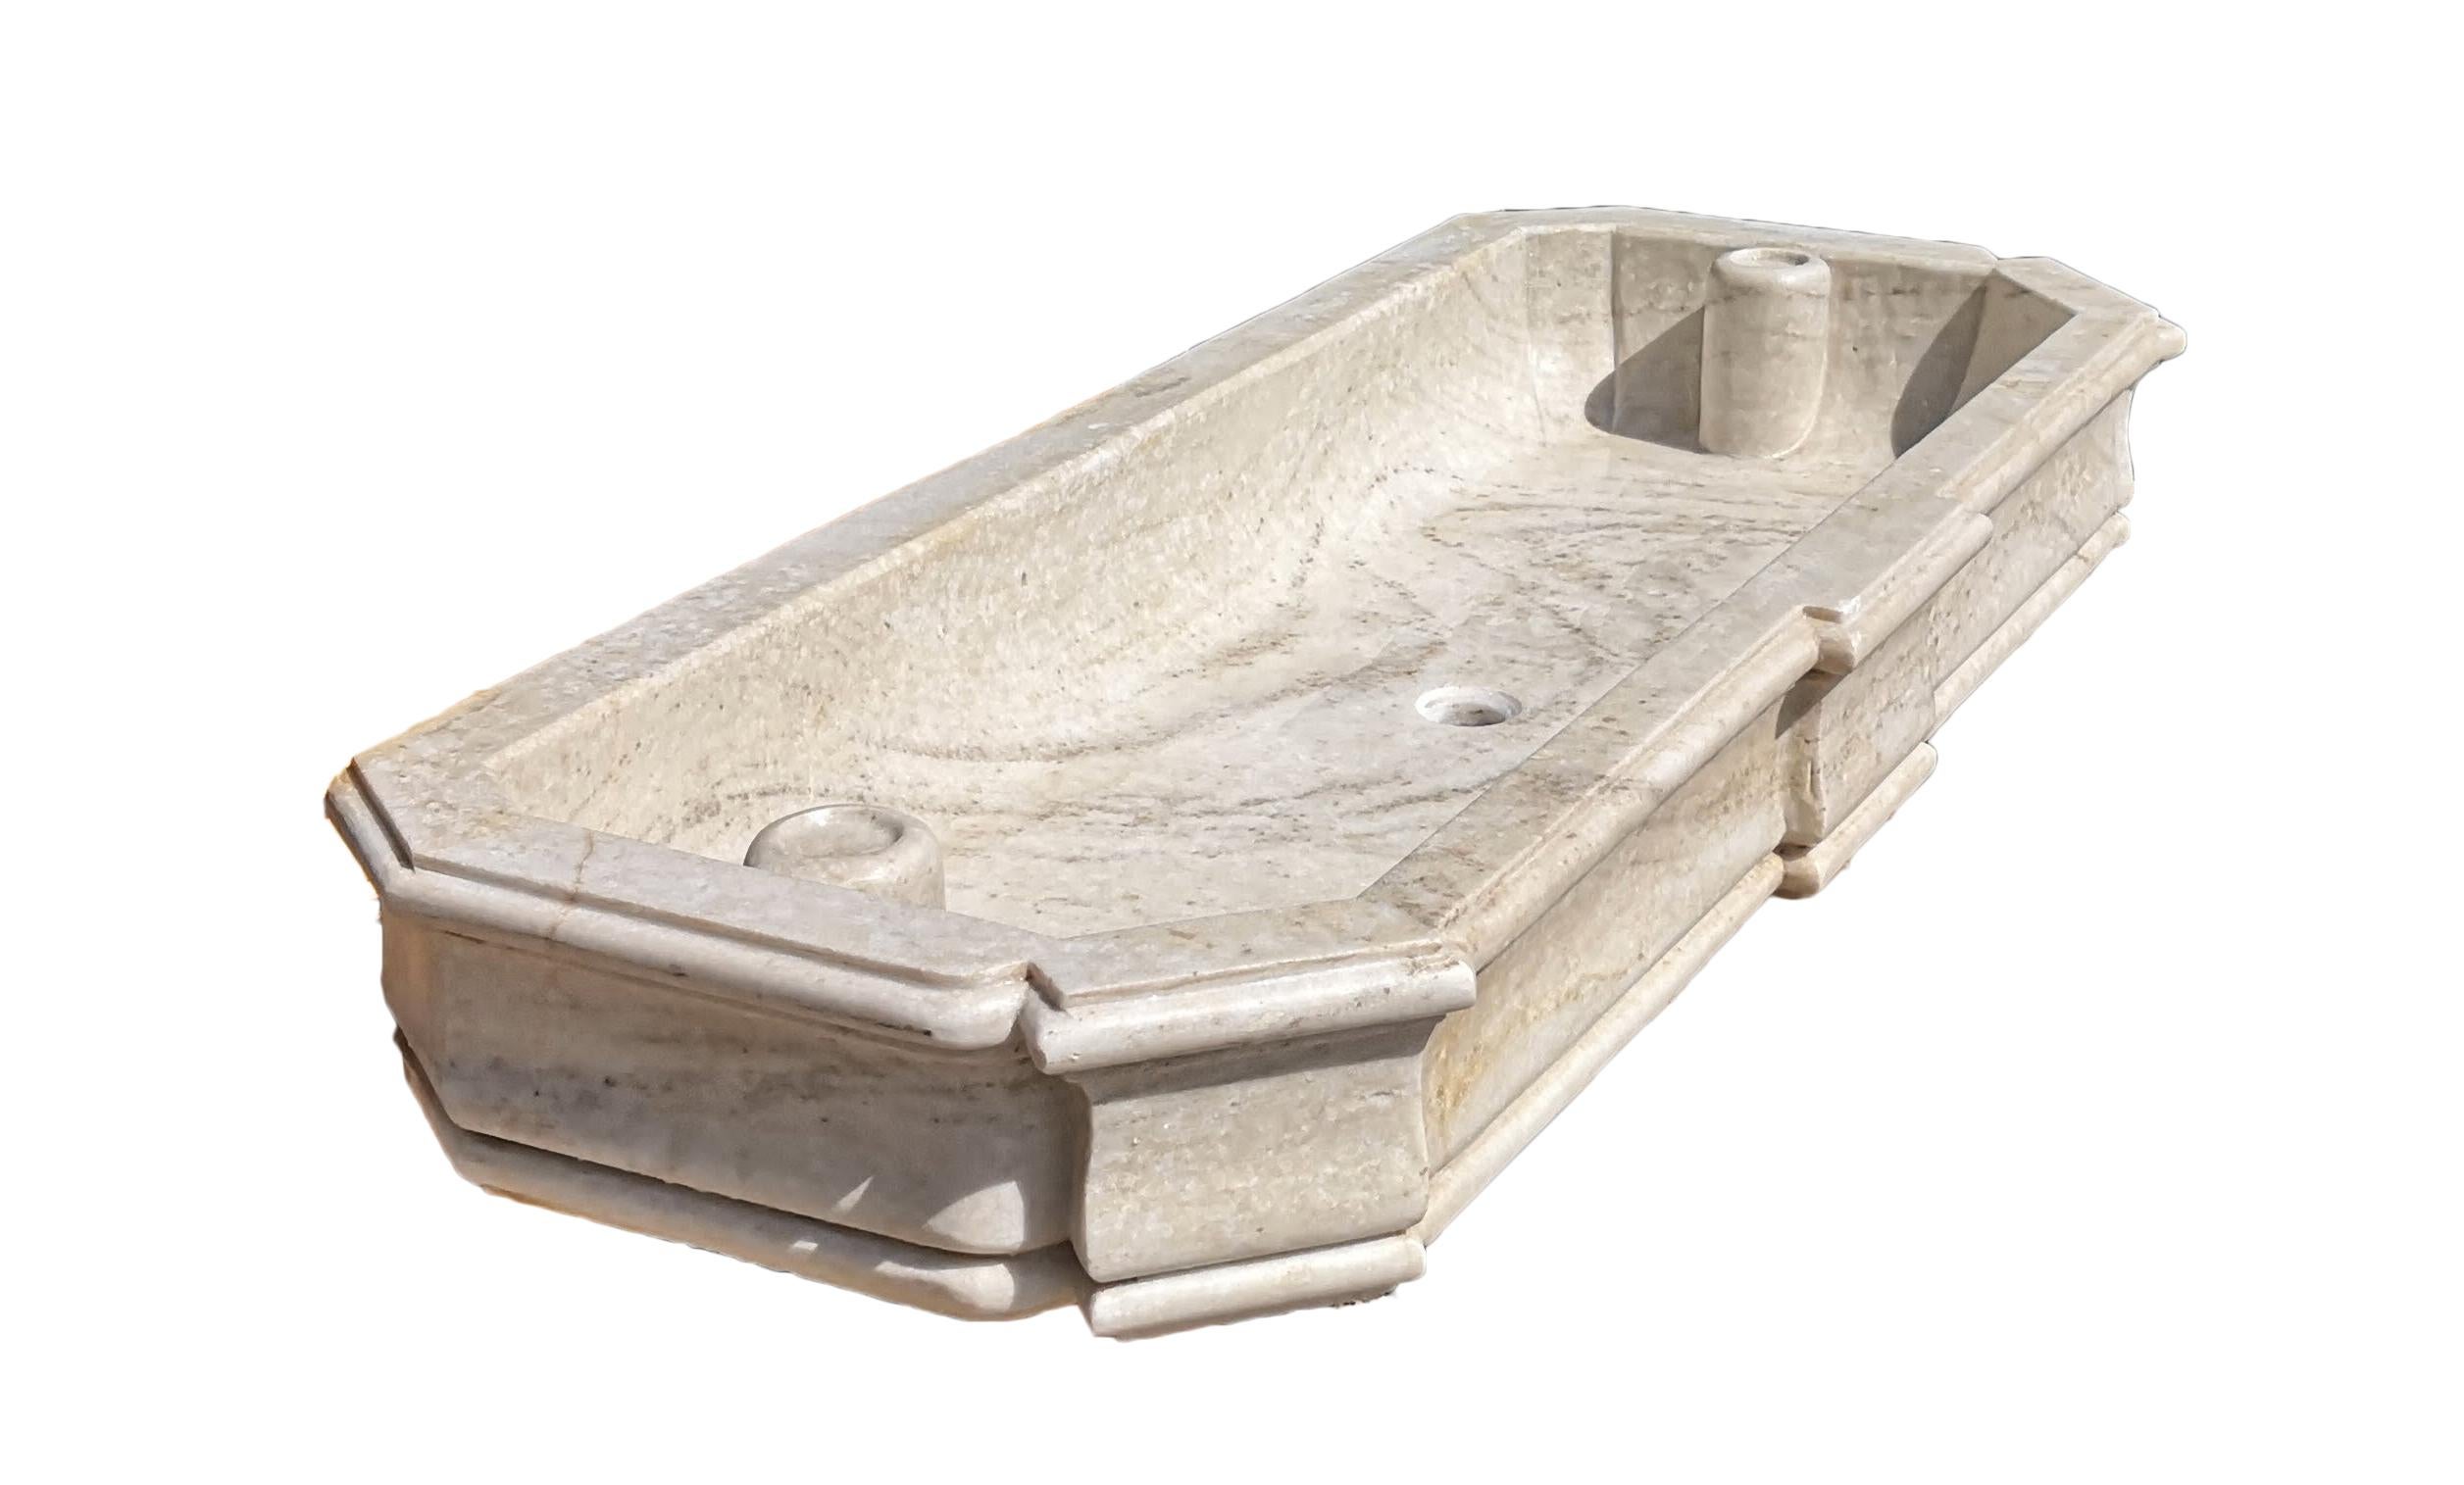 This timeless beautiful Italian classical double sink is cut from one single block of white Carrara marble, the design has not changed since Greek and Roman times, it carries superb artistic merit easily fitting in with old and new buildings. It